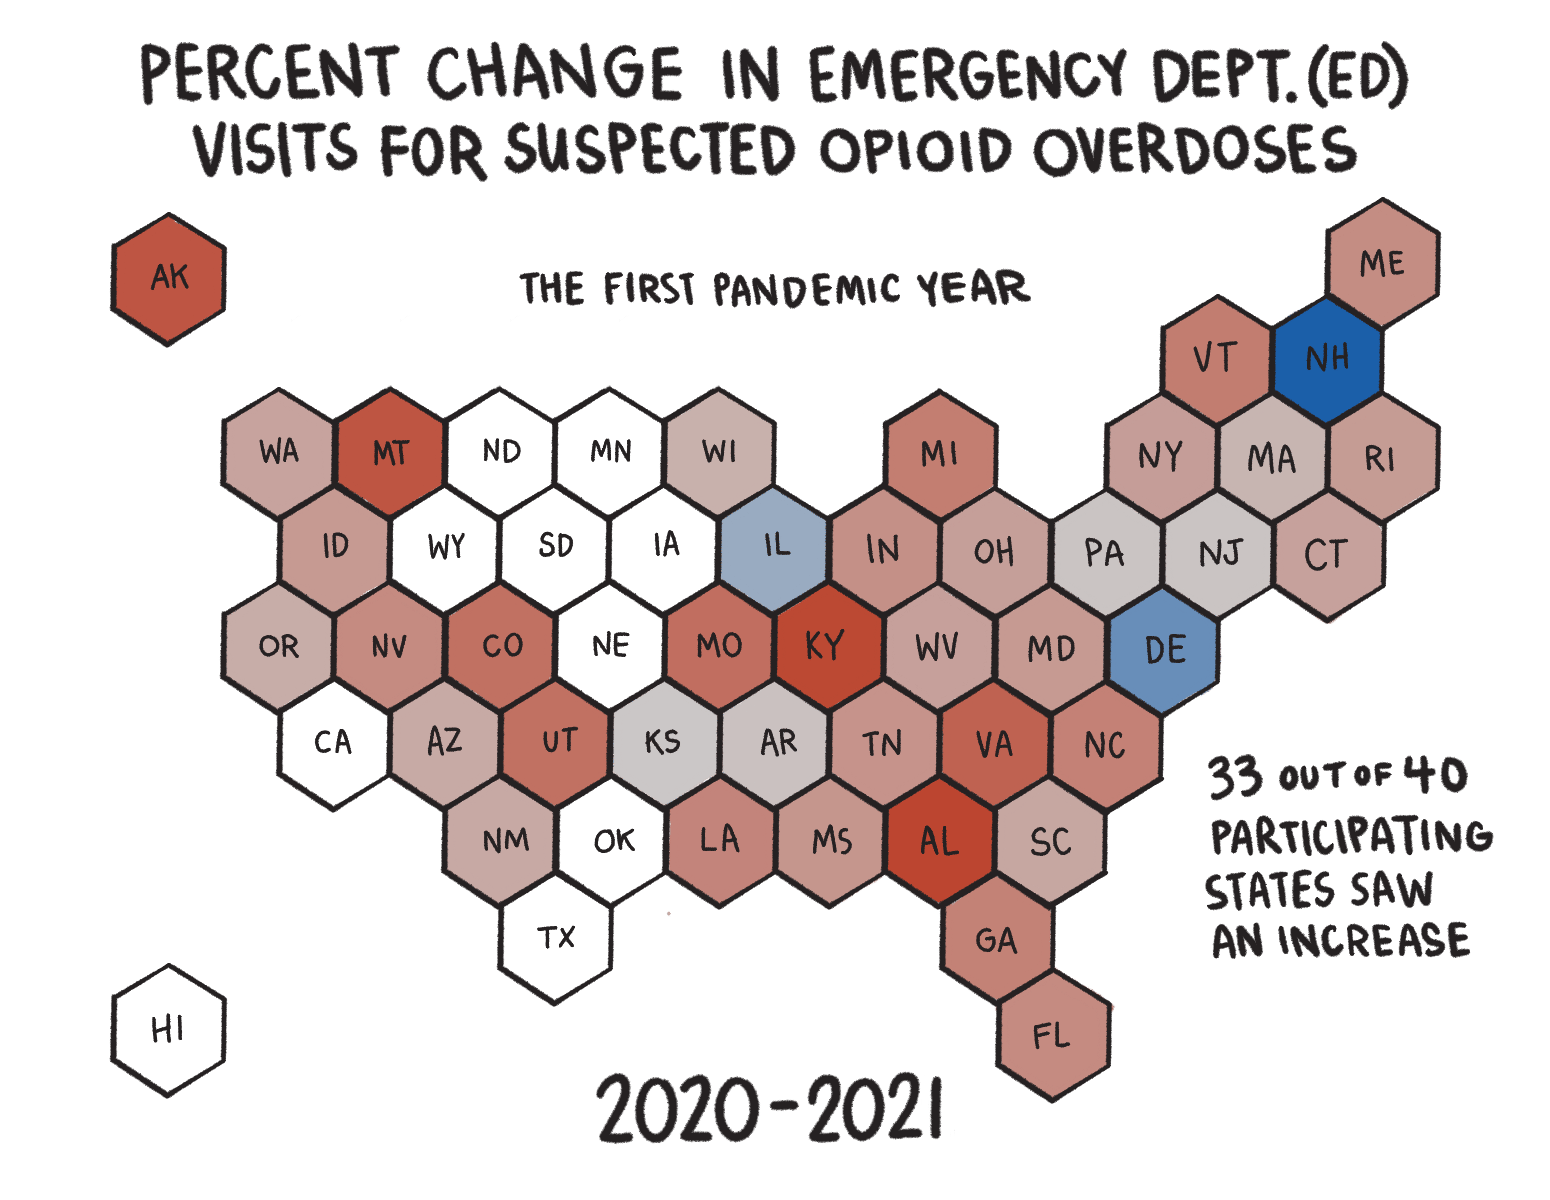 Second Hexagonal US State Chart showing the Percent change in emergency department visits for suspected opioid overdoses from 2020-2021, the first year of COVID. 33 out of 40 participating states saw an increase in overdose visits. Most states are shaded red. 